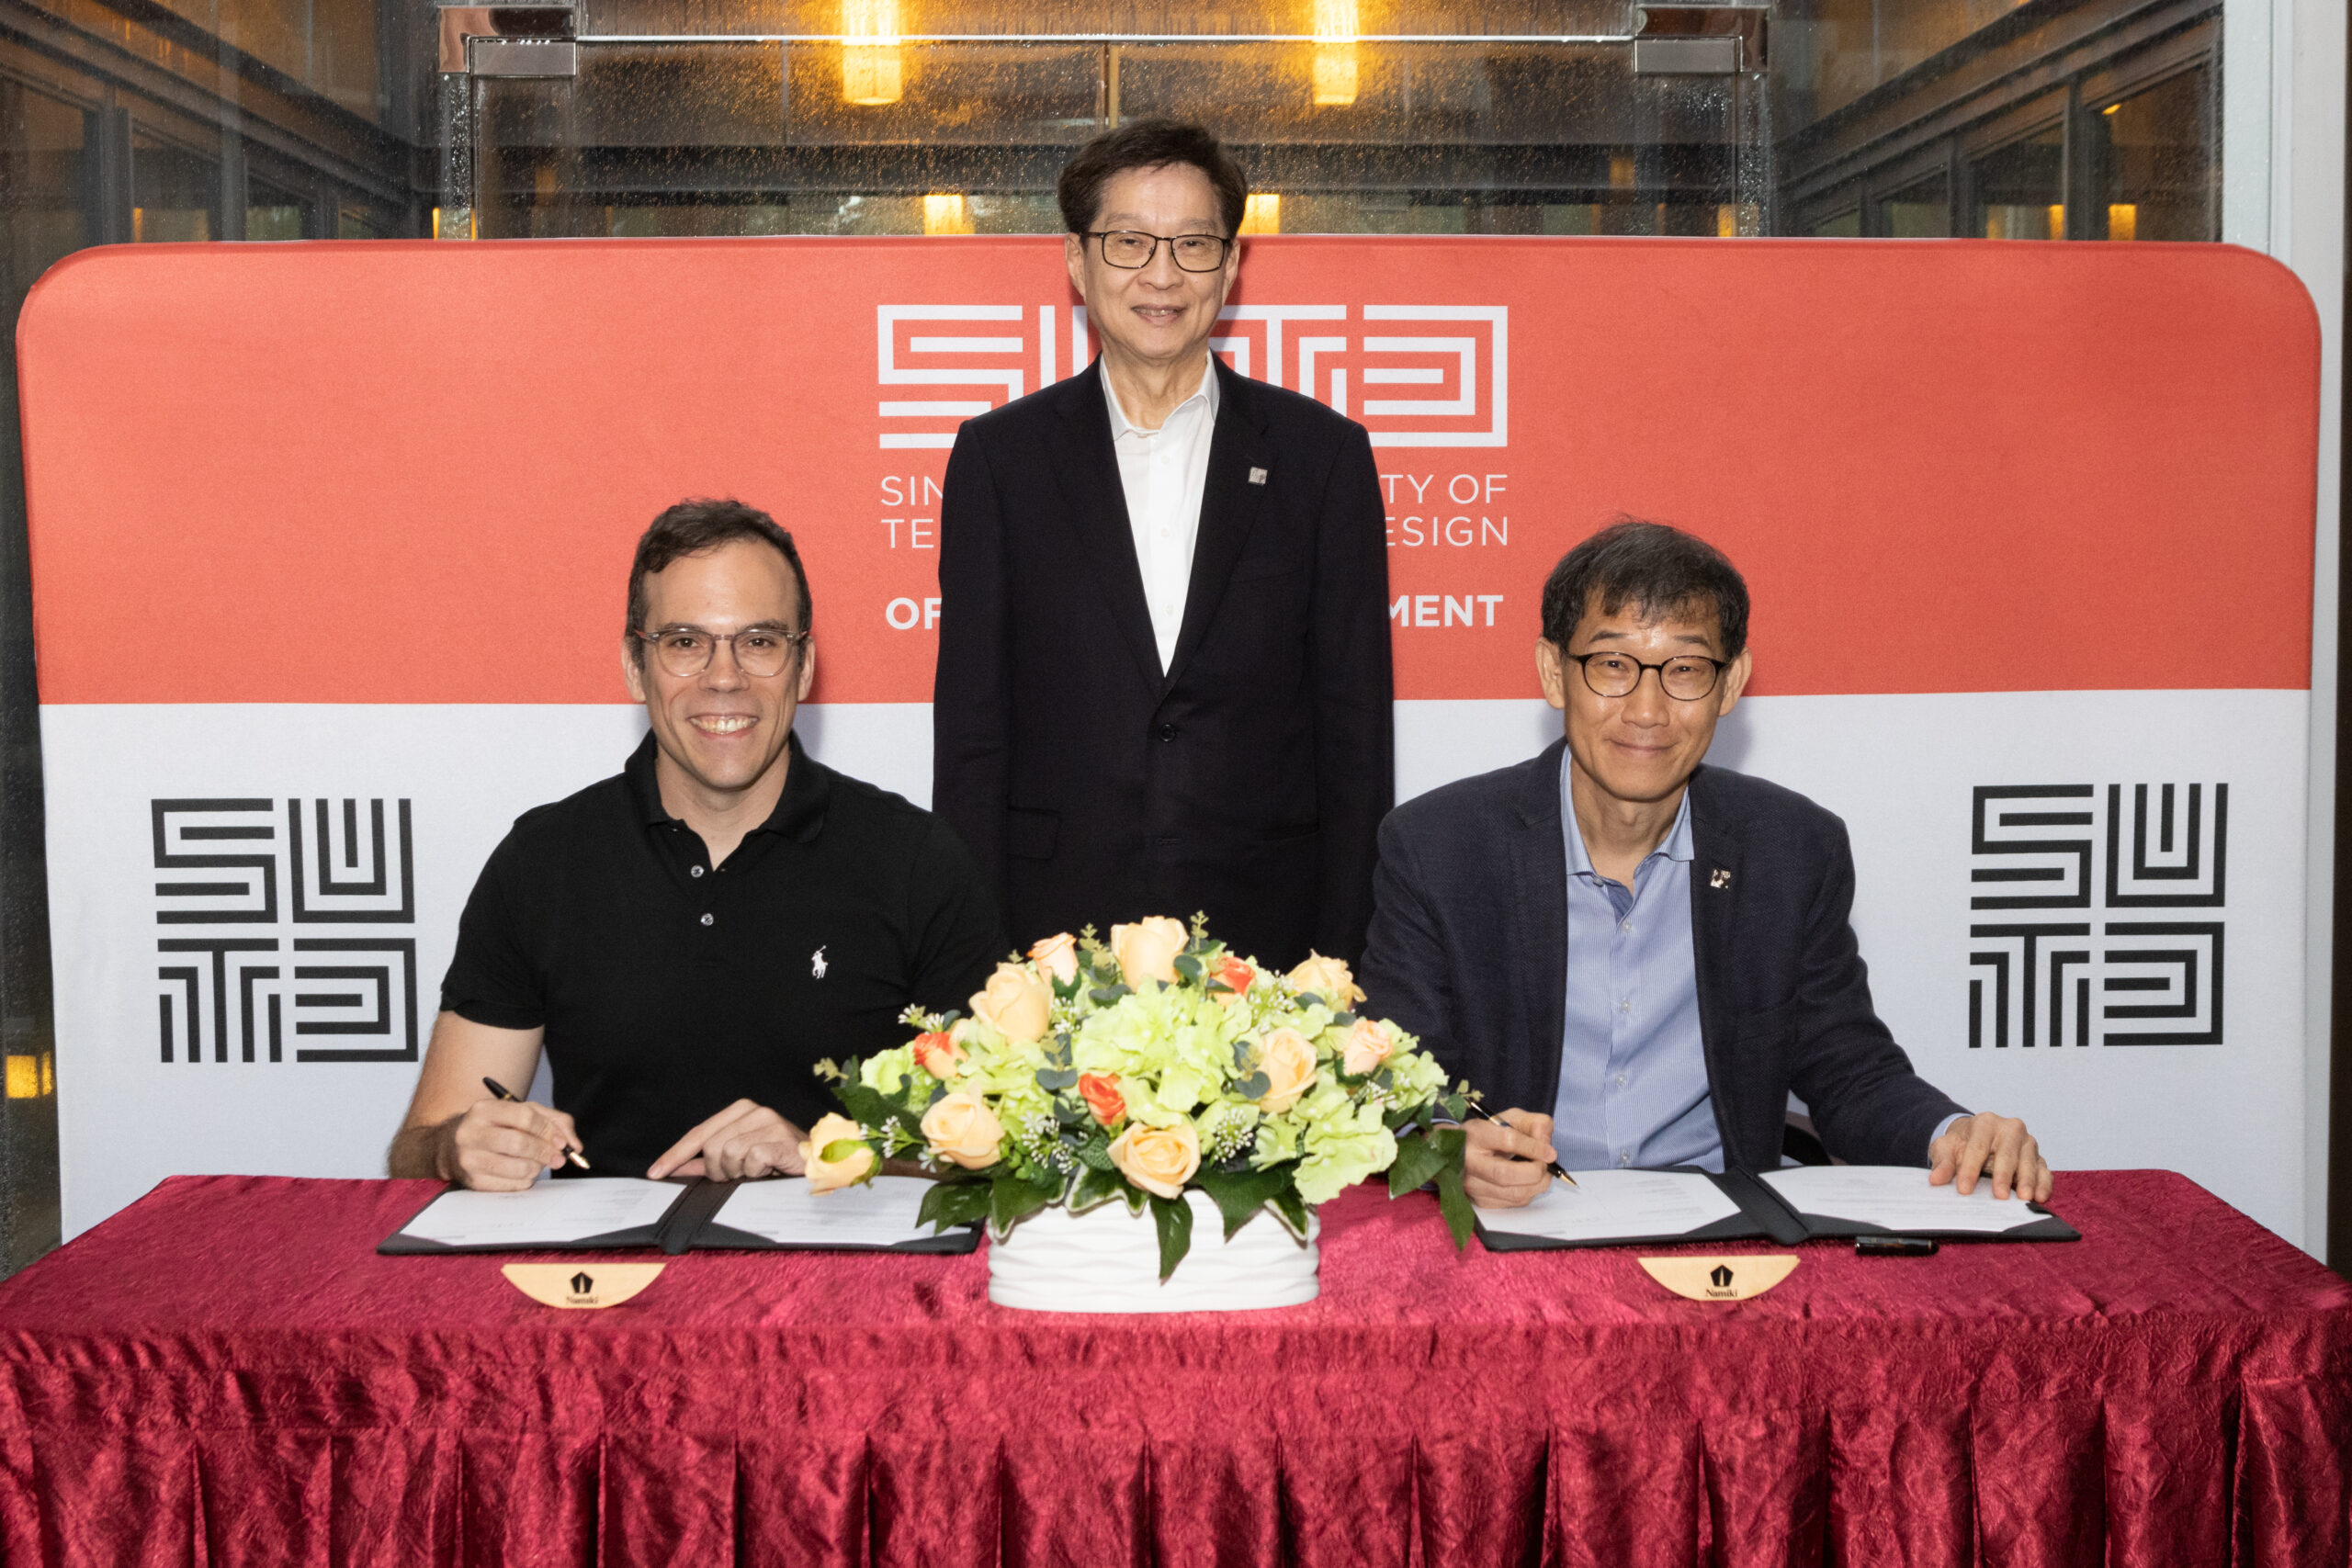 Image - foodpanda inks gift agreement with SUTD to nurture Singapore’s tech talent of the future